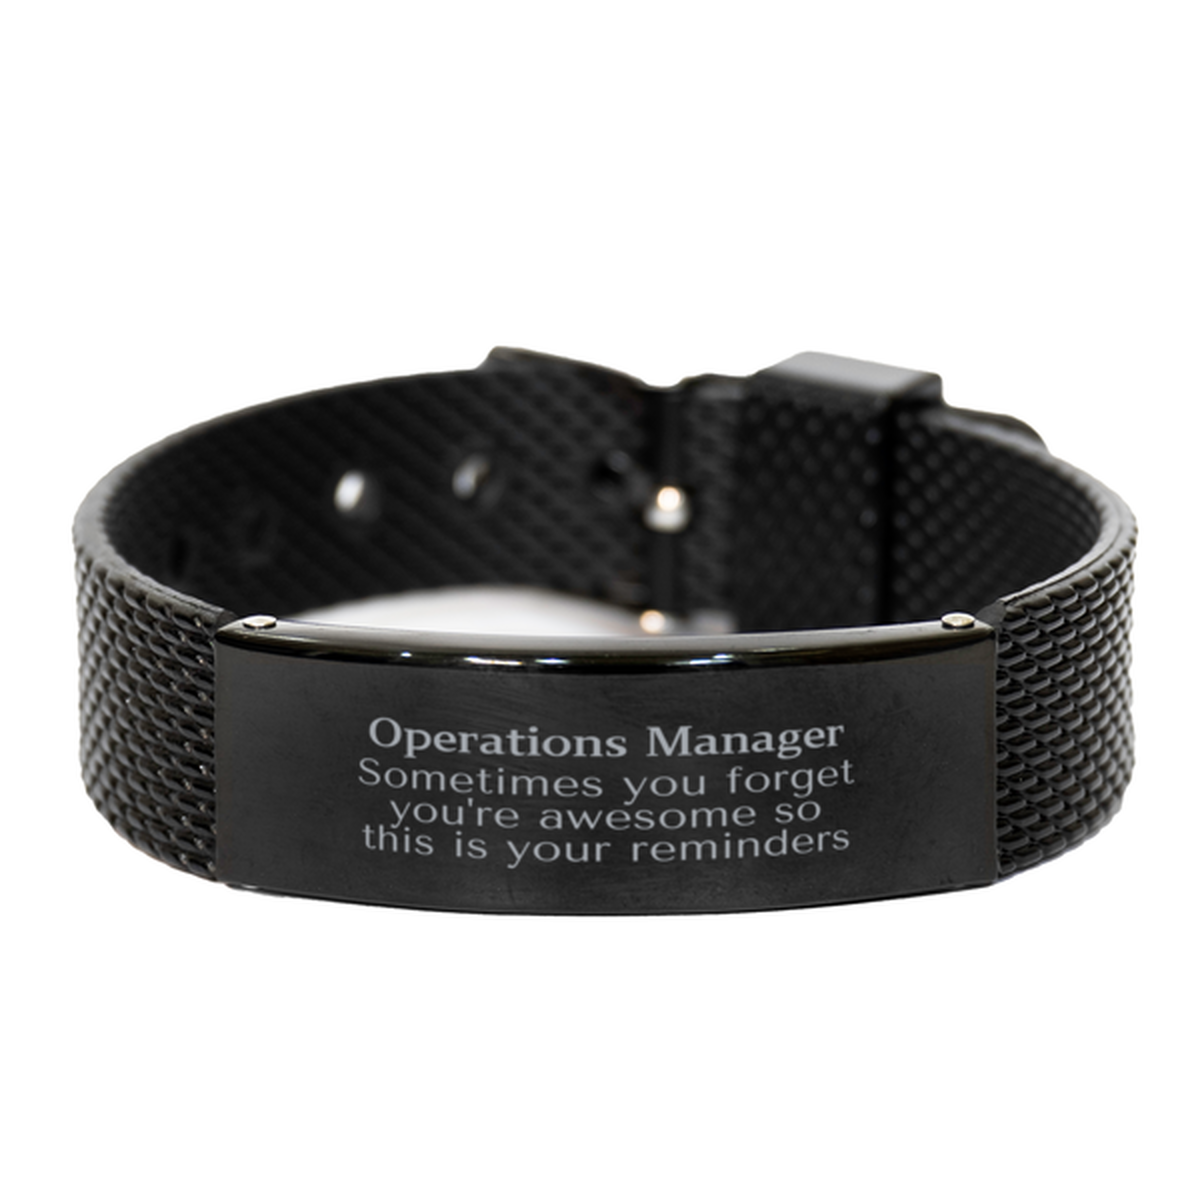 Sentimental Operations Manager Black Shark Mesh Bracelet, Operations Manager Sometimes you forget you're awesome so this is your reminders, Graduation Christmas Birthday Gifts for Operations Manager, Men, Women, Coworkers